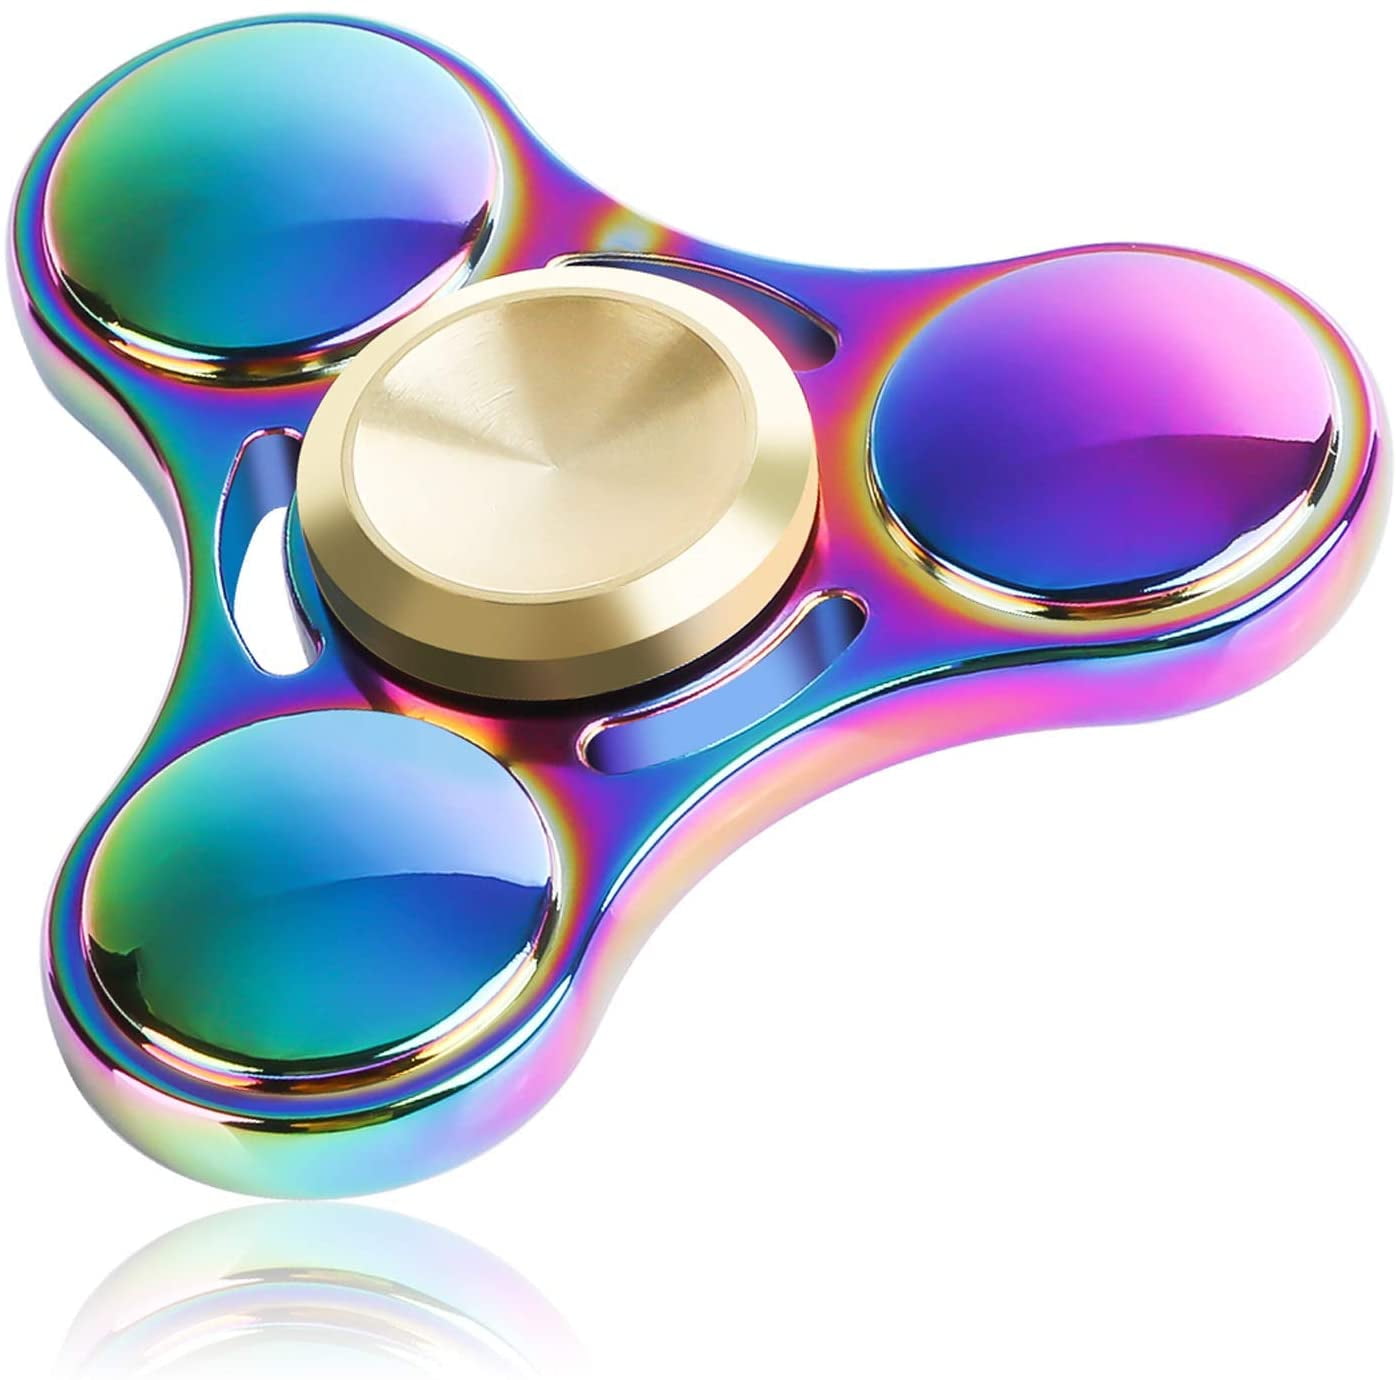 Fidget spinner game hand hand toy 3d anti stress metal adult child EDC adhd 